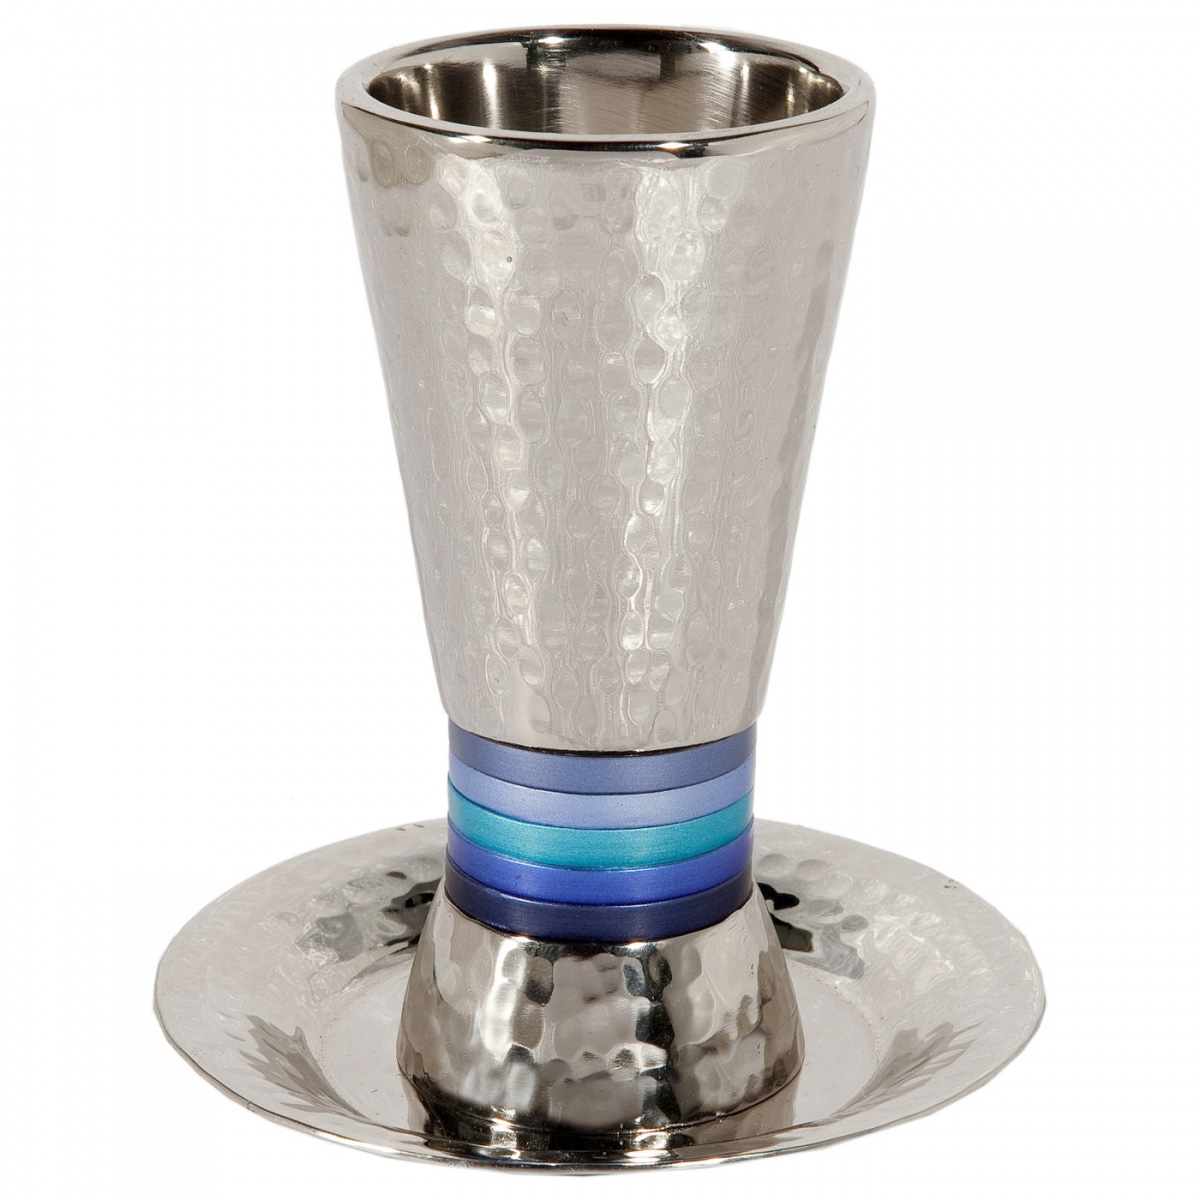 Yair Emanuel Textured Nickel 5-Bands Kiddush Cup with Plate - 1